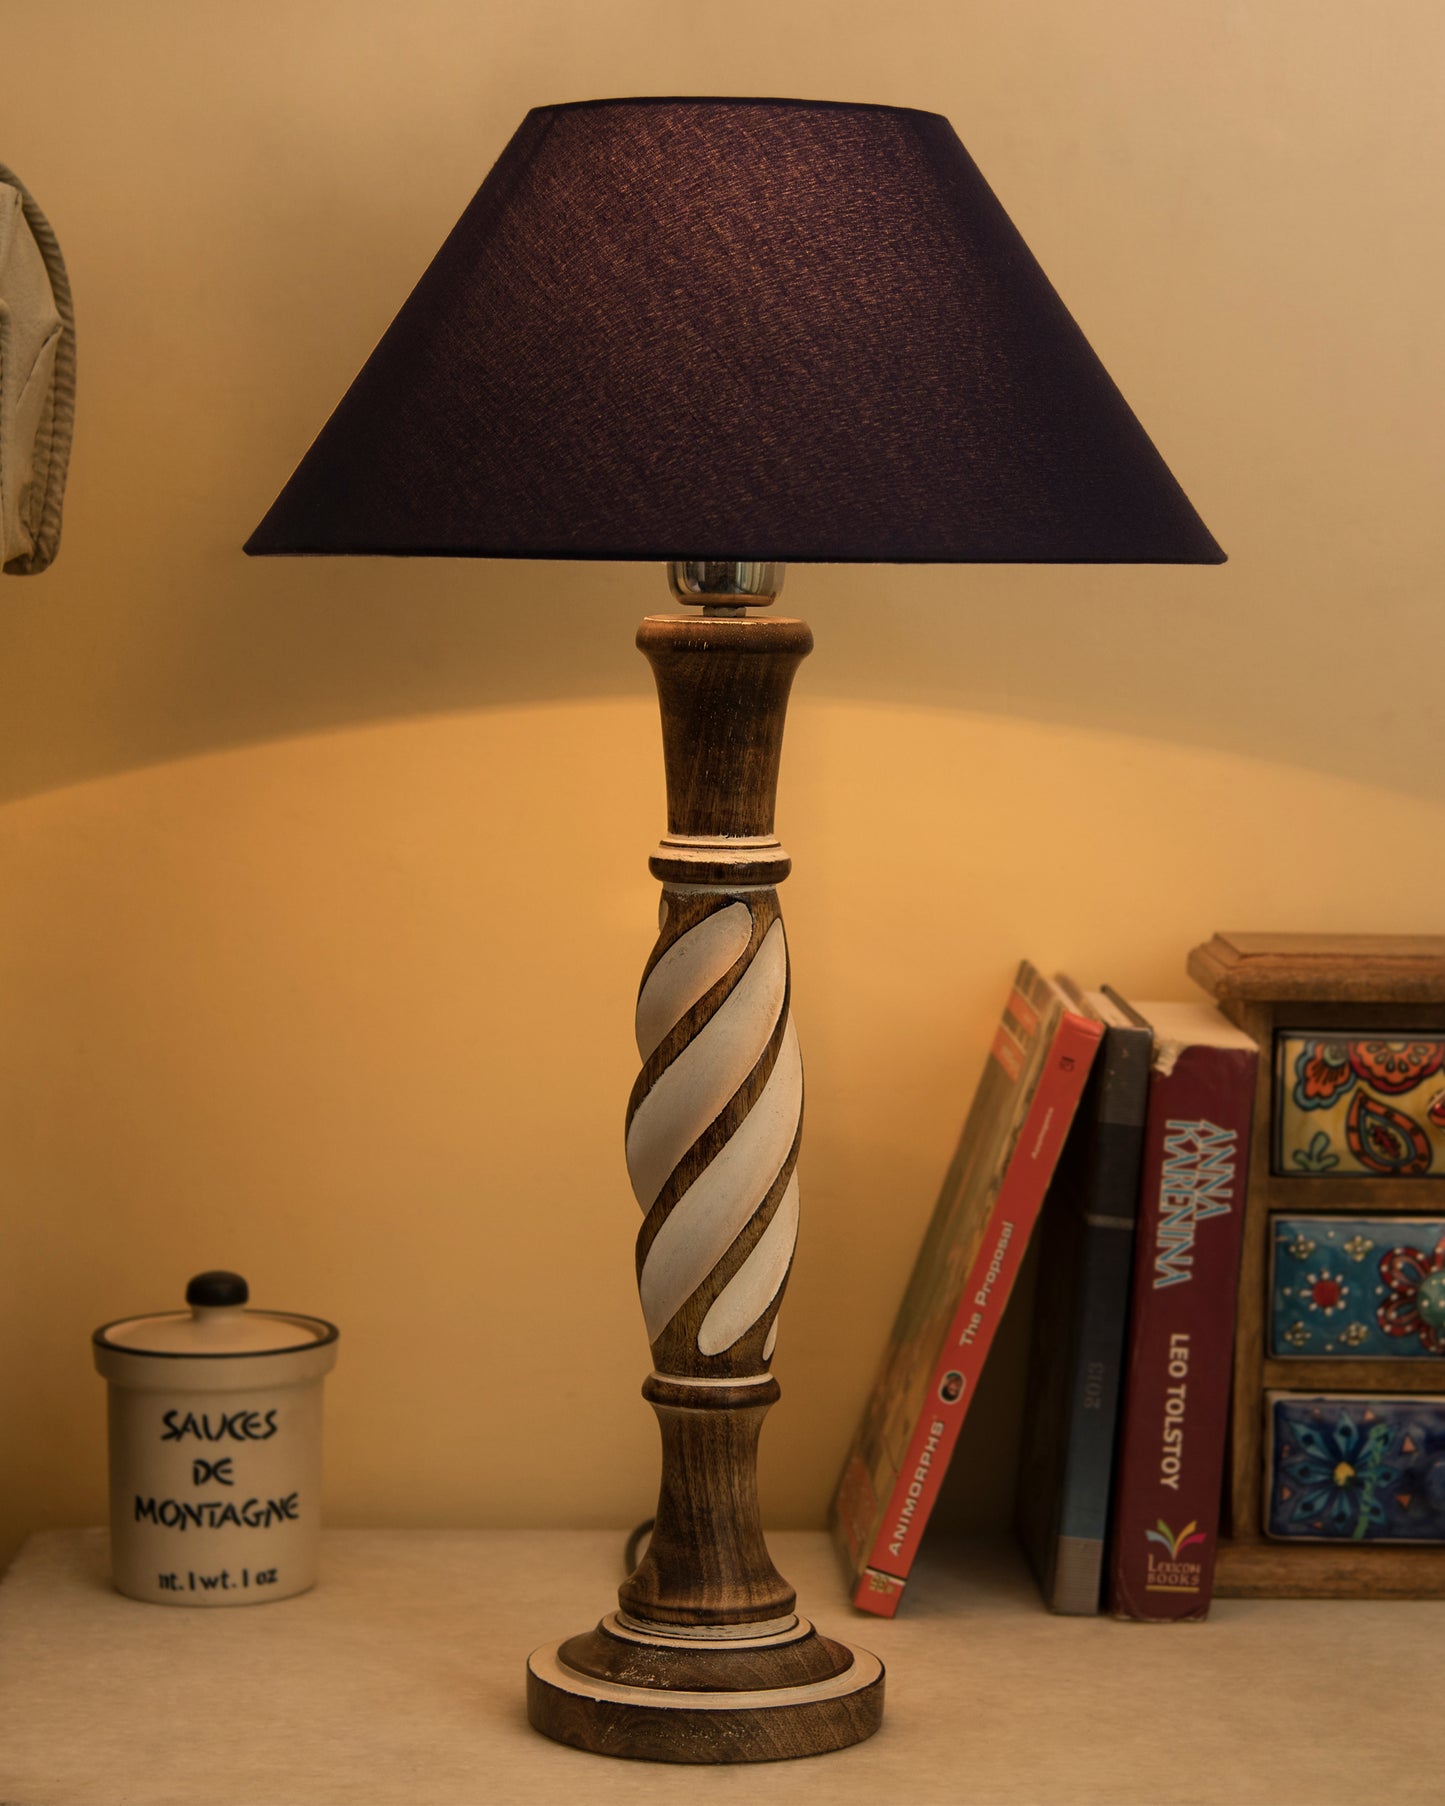 Antique White Twister wooden table lamp with shade